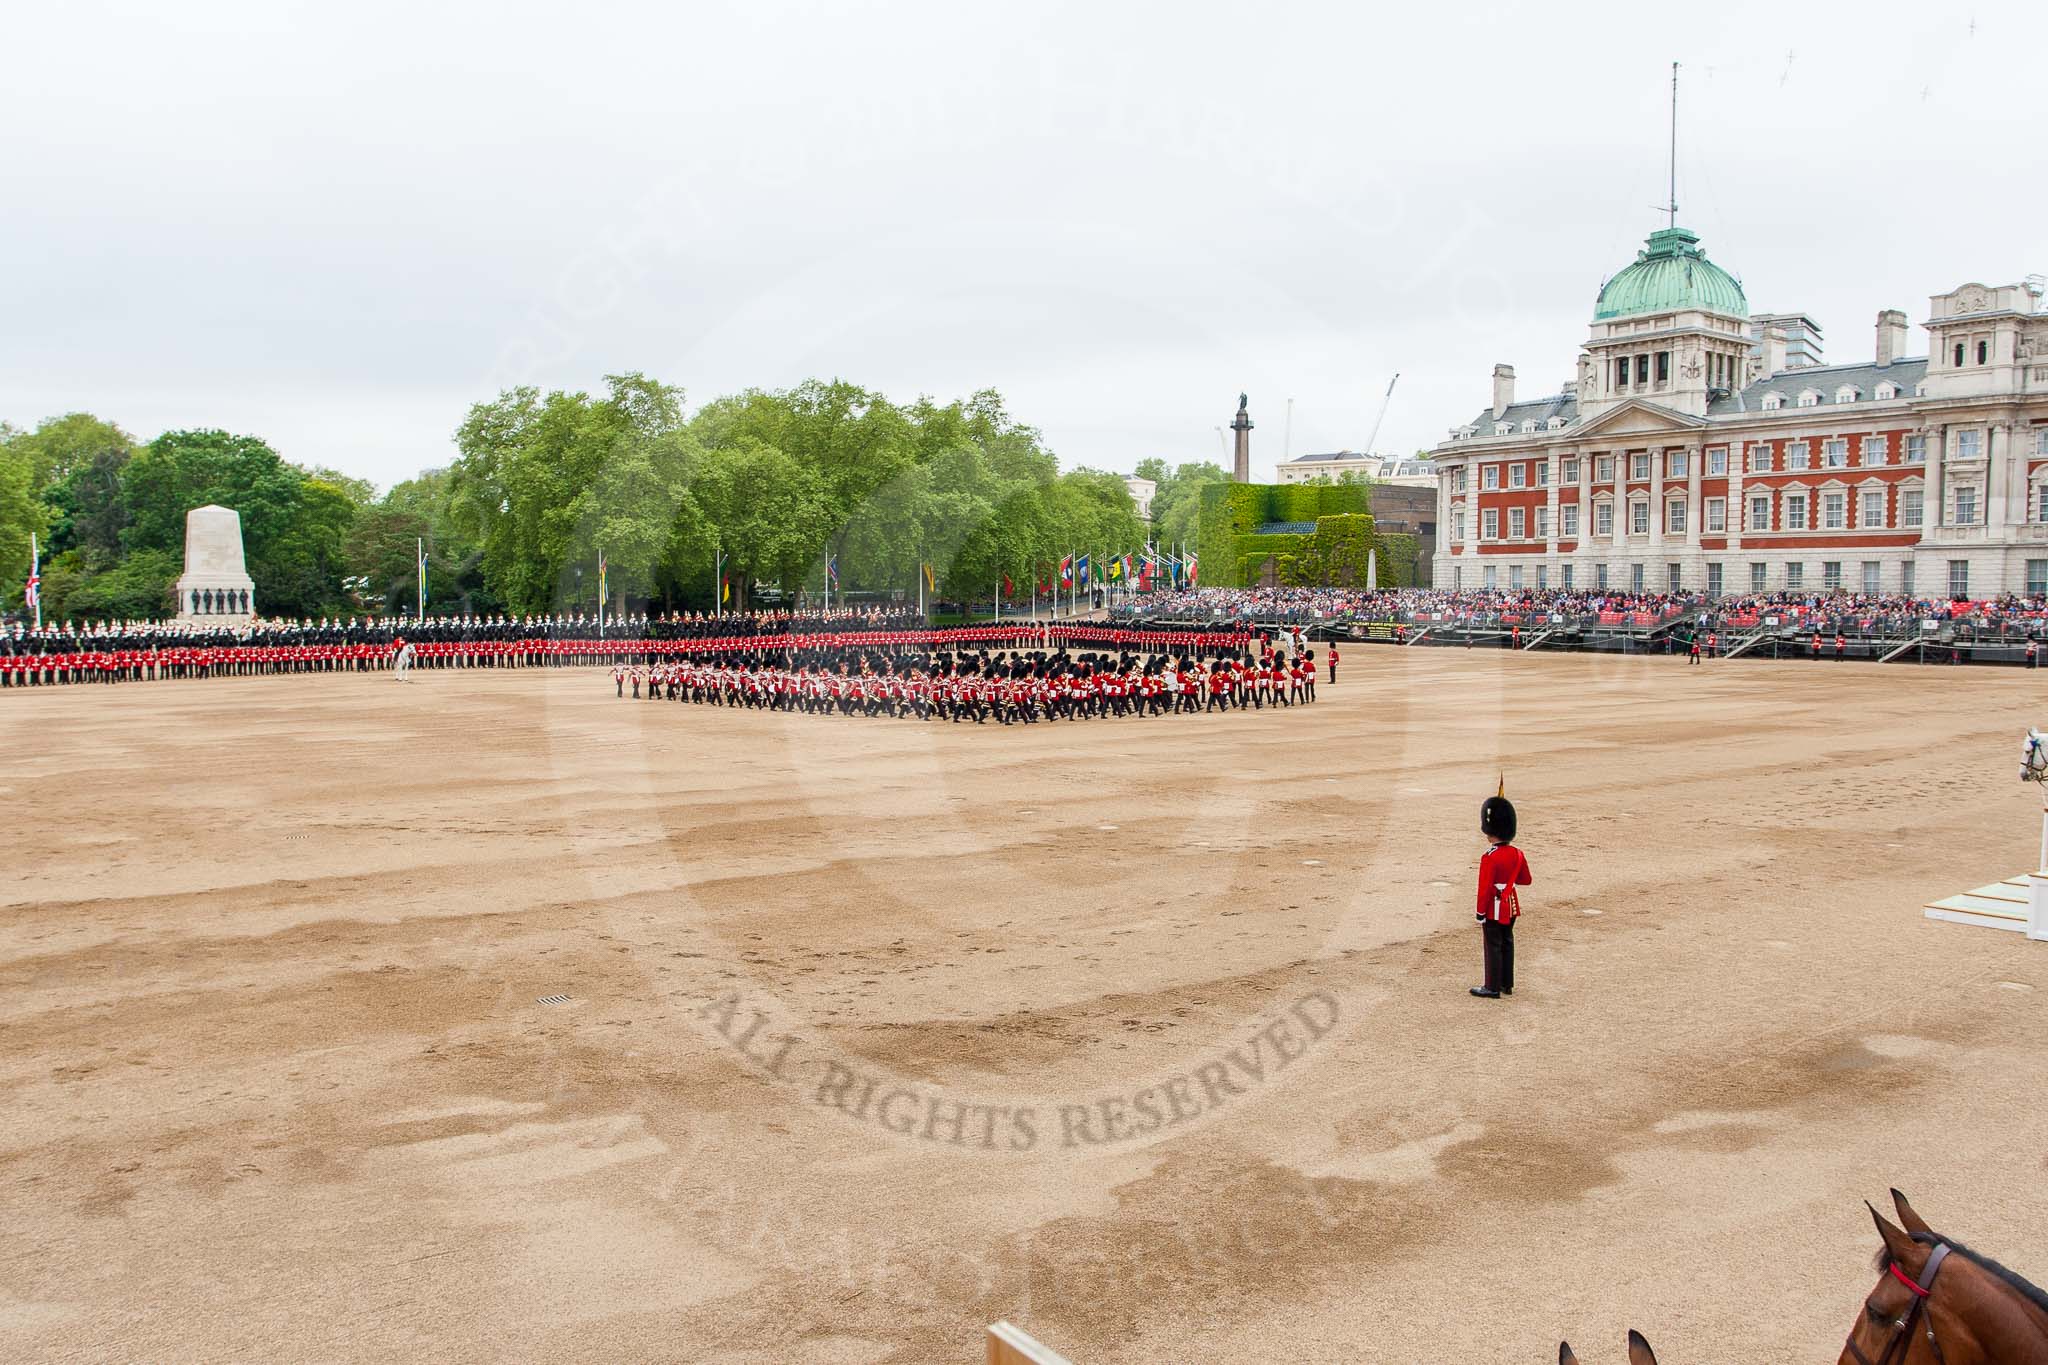 Major General's Review 2013: The Massed Bands playing "The British Grenadiers" whilst No. 1 Guard is on the move..
Horse Guards Parade, Westminster,
London SW1,

United Kingdom,
on 01 June 2013 at 11:15, image #371